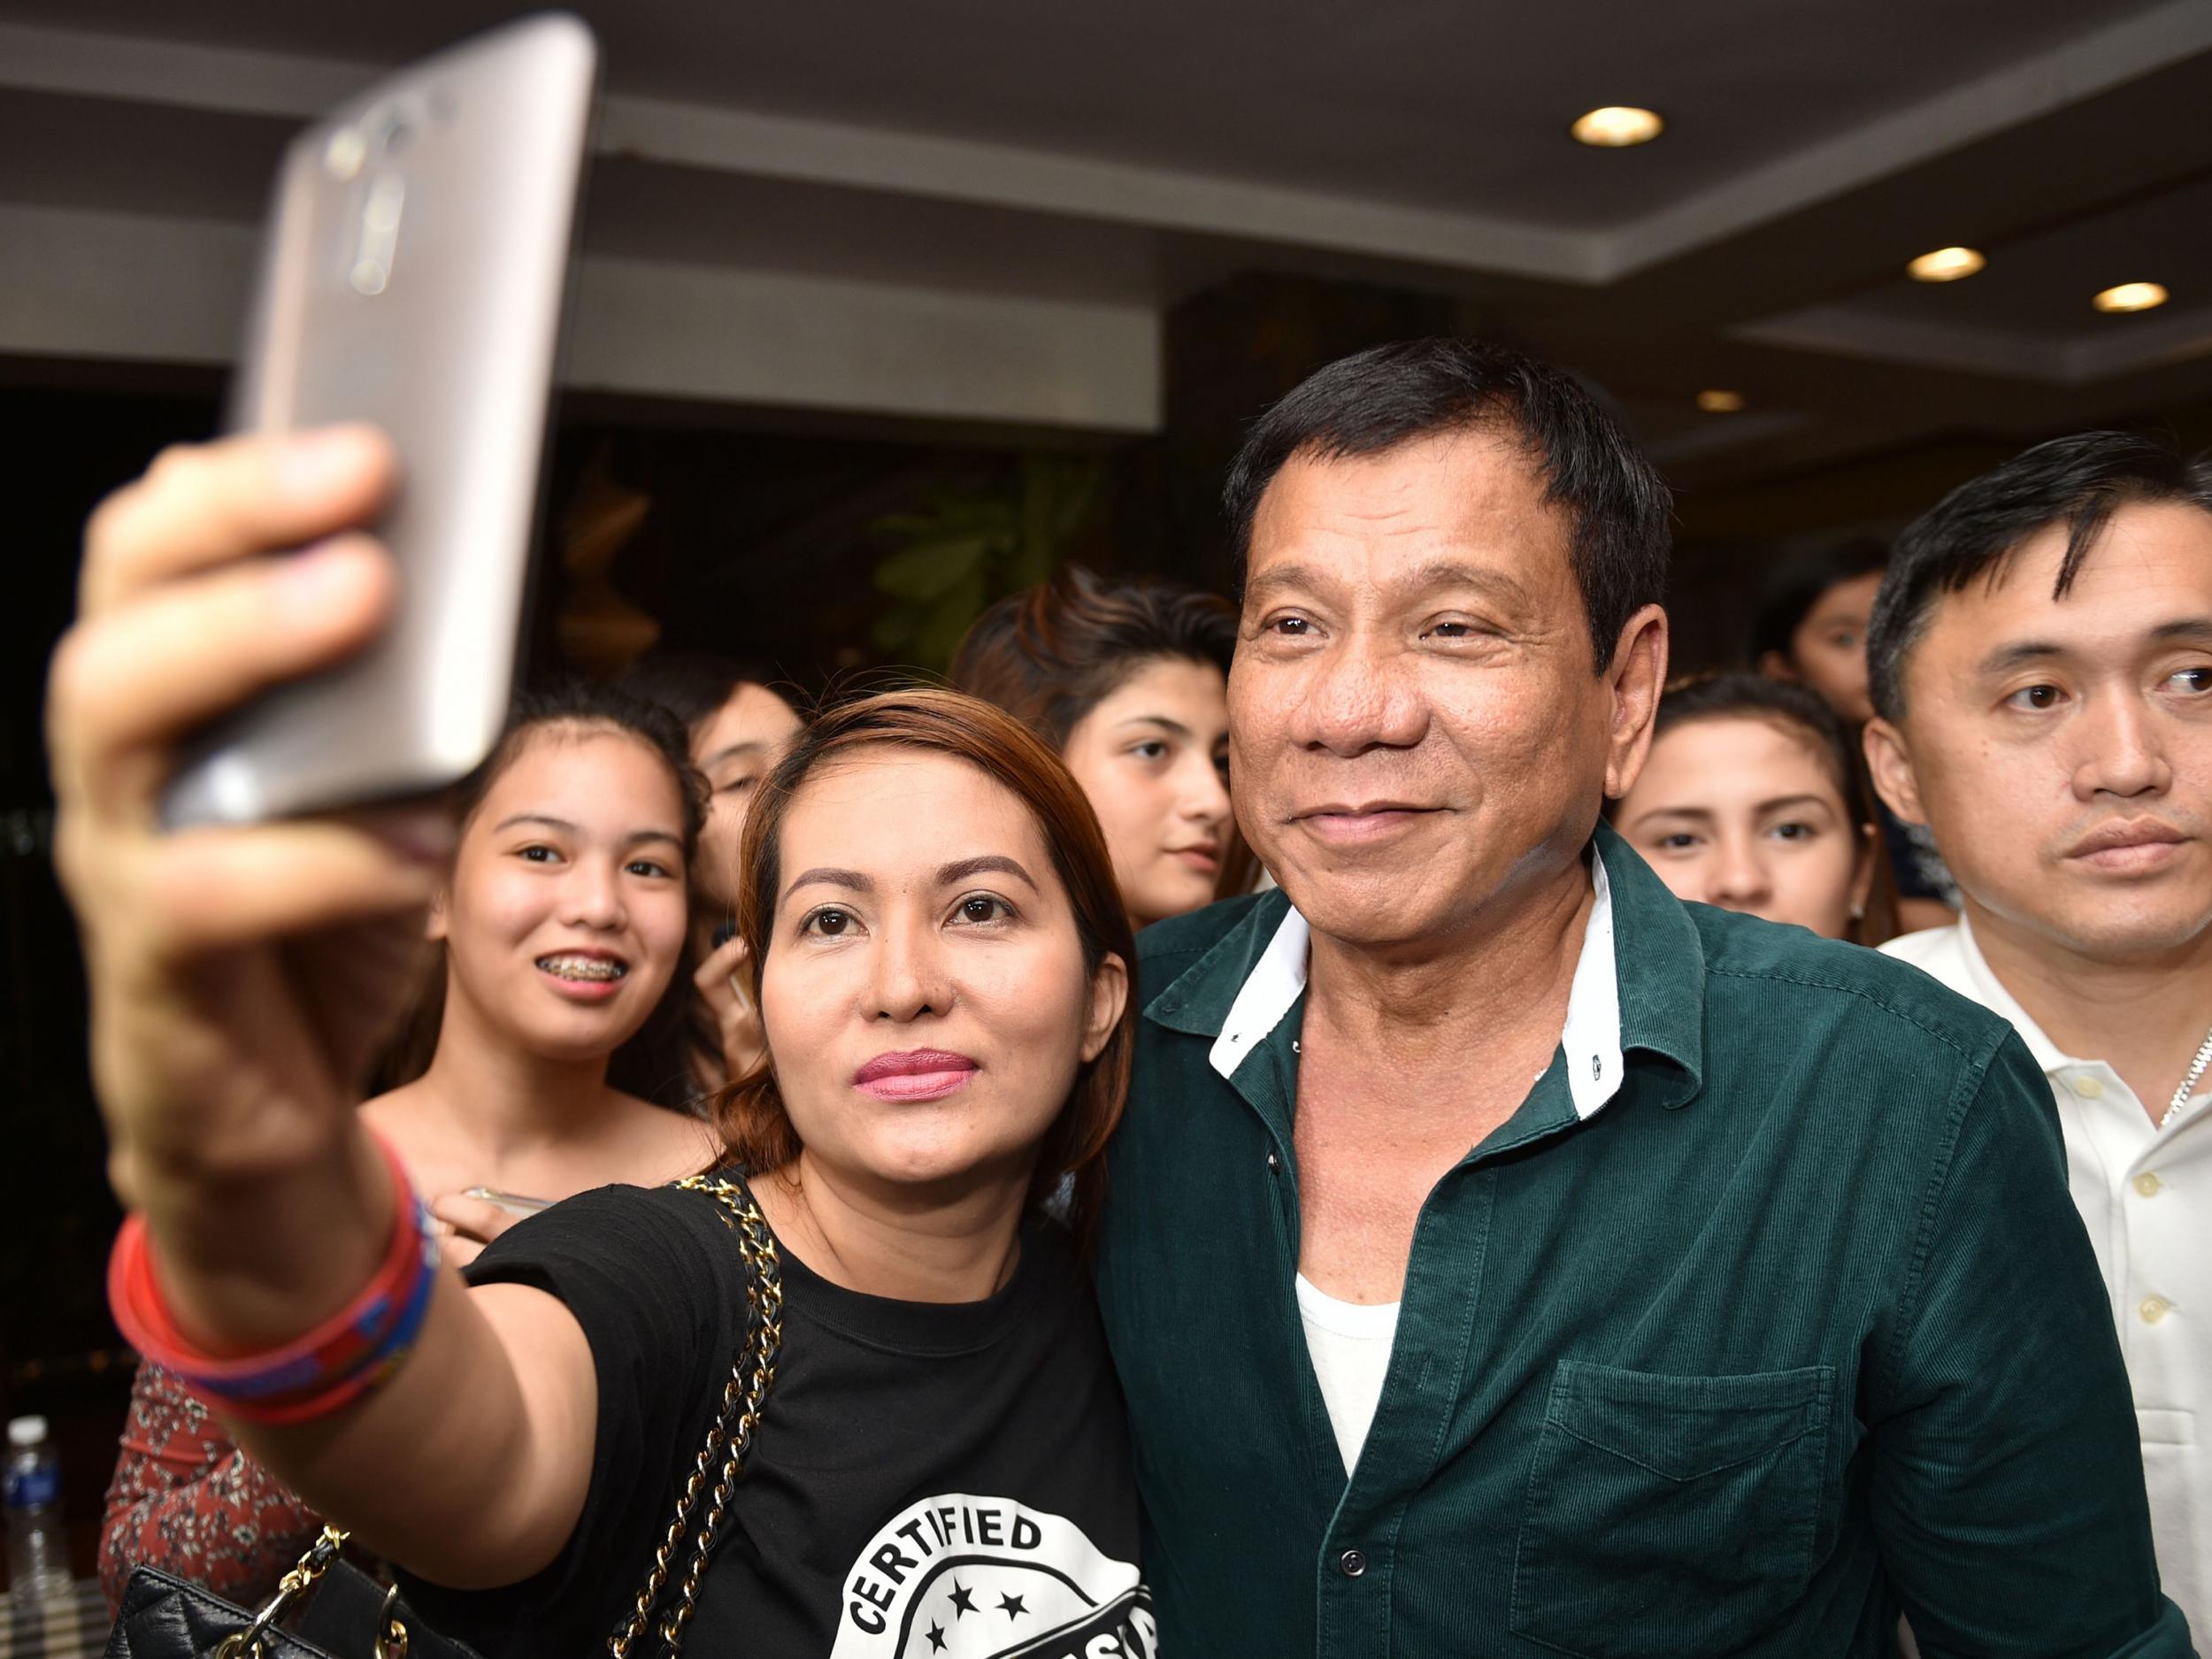 Philippine President-elect Rodrigo Duterte poses for pictures with supporters